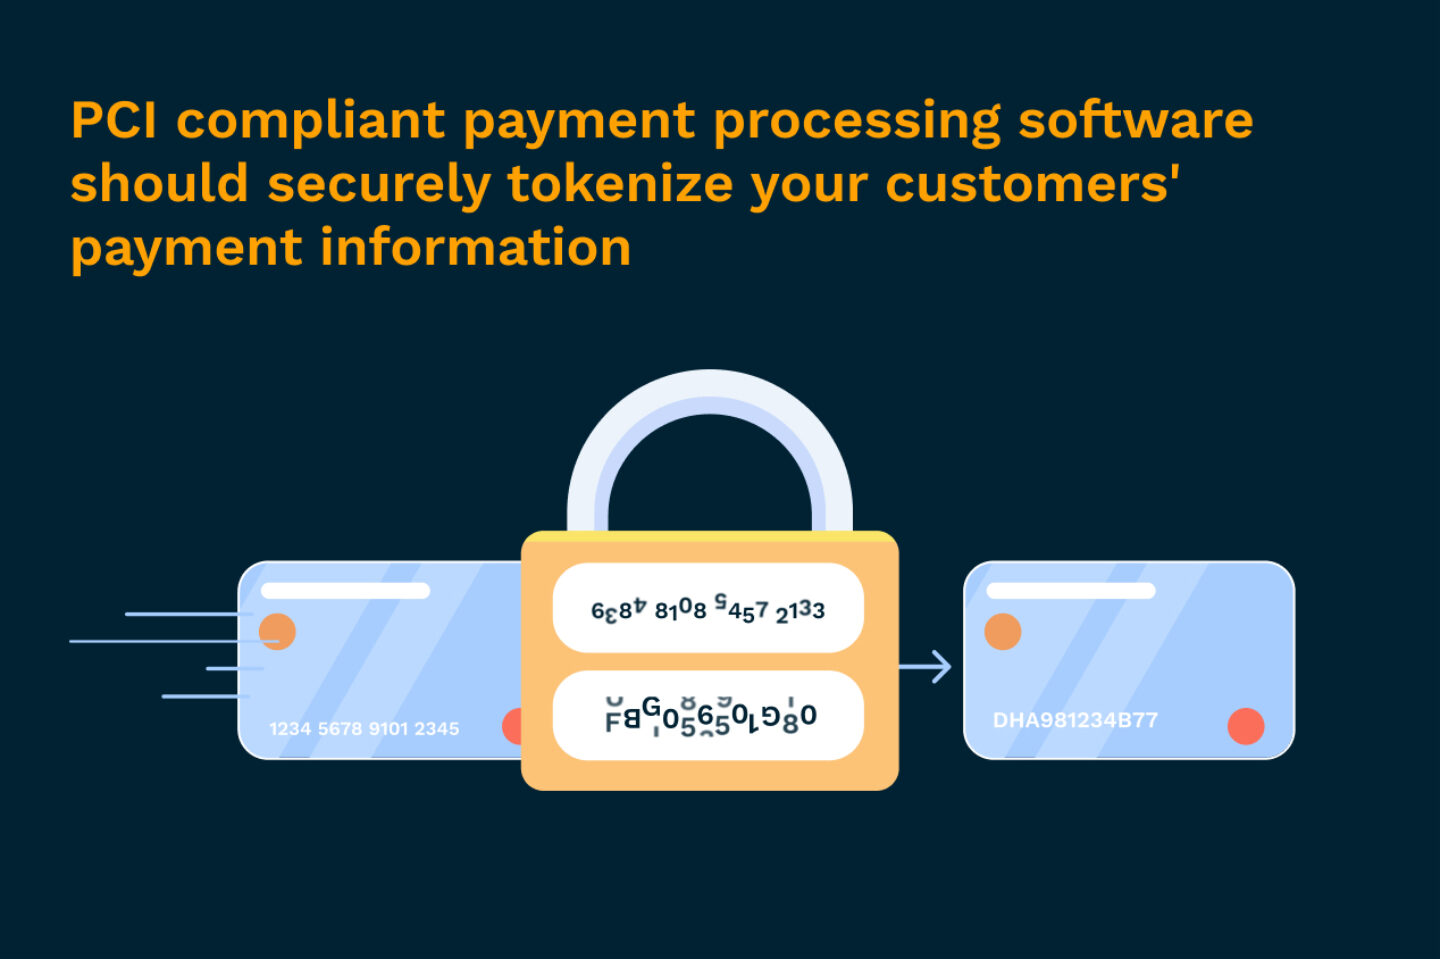 PCI compliant payment processing software should securely tokenize your customers' payment information